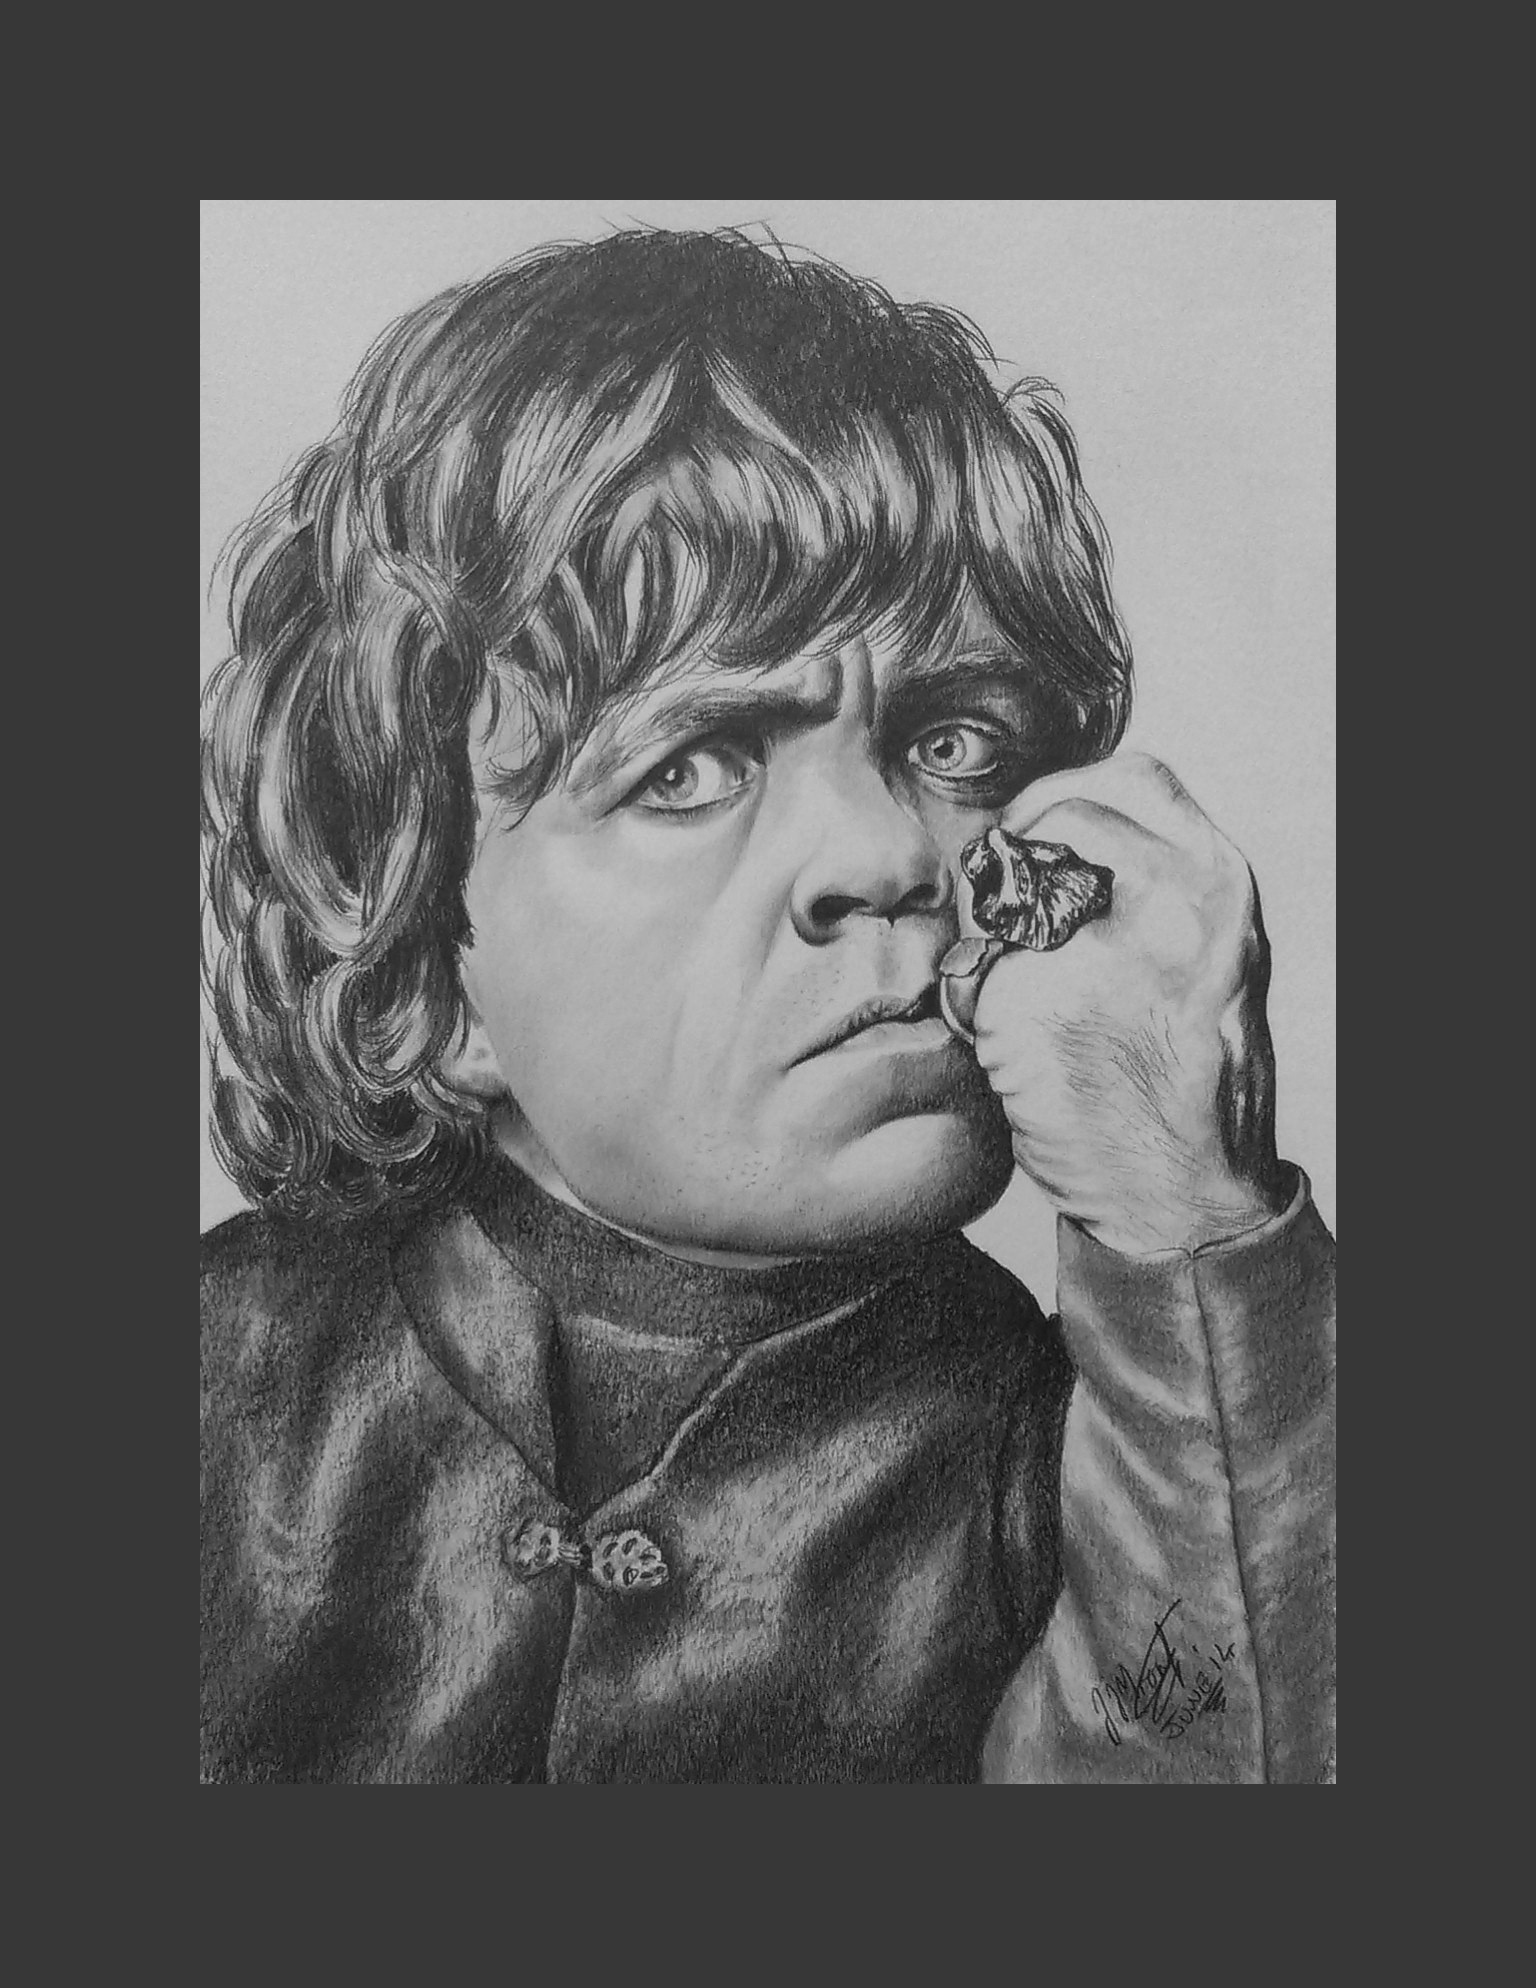 Peter Dinklage as Tyrion Lannister by bandit-of-the-north